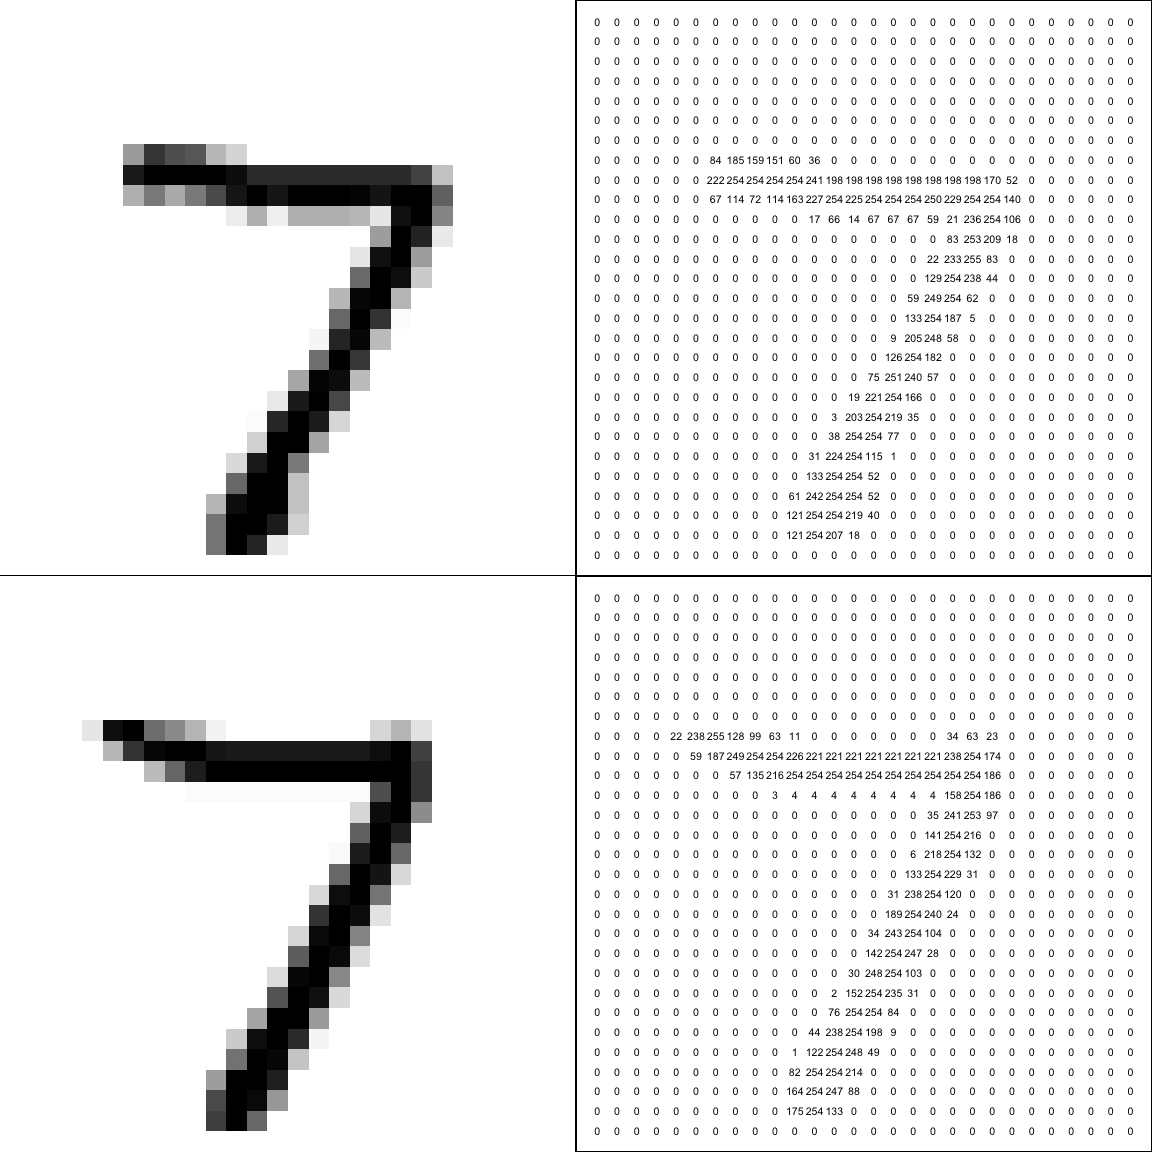 Top row: the first test image and its numerical representation $\tilde{\mathbf x}_1$. Bottom row: image number 53844 in the training data set and its numerical representation $\mathbf x_{53844}$. To compute the similarity between the images, we square the differences between the numbers at the same corresponding positions in the right hand column, and sum. By this measure of similarity, image 53844 is closest to our test image.